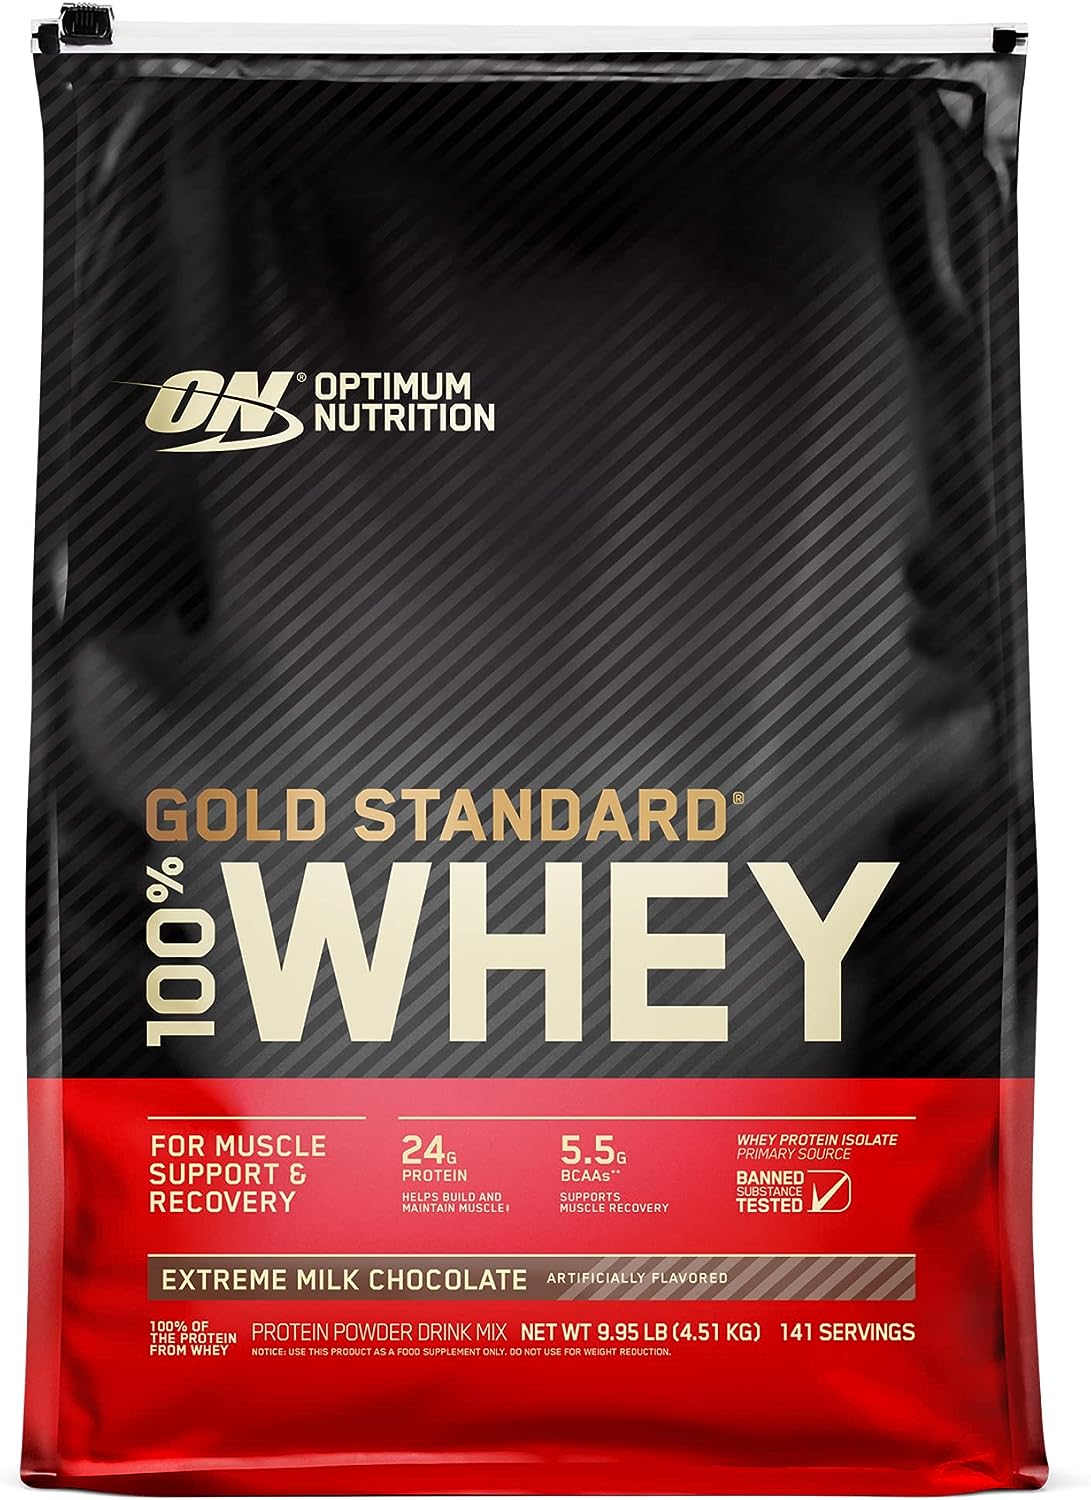 Optimum Nutrition Gold Standard 100% Whey Protein Powder (Various Flavors): 10-lb from $91.79, 5-lb from $47.57 w/ S&S + Free Shipping